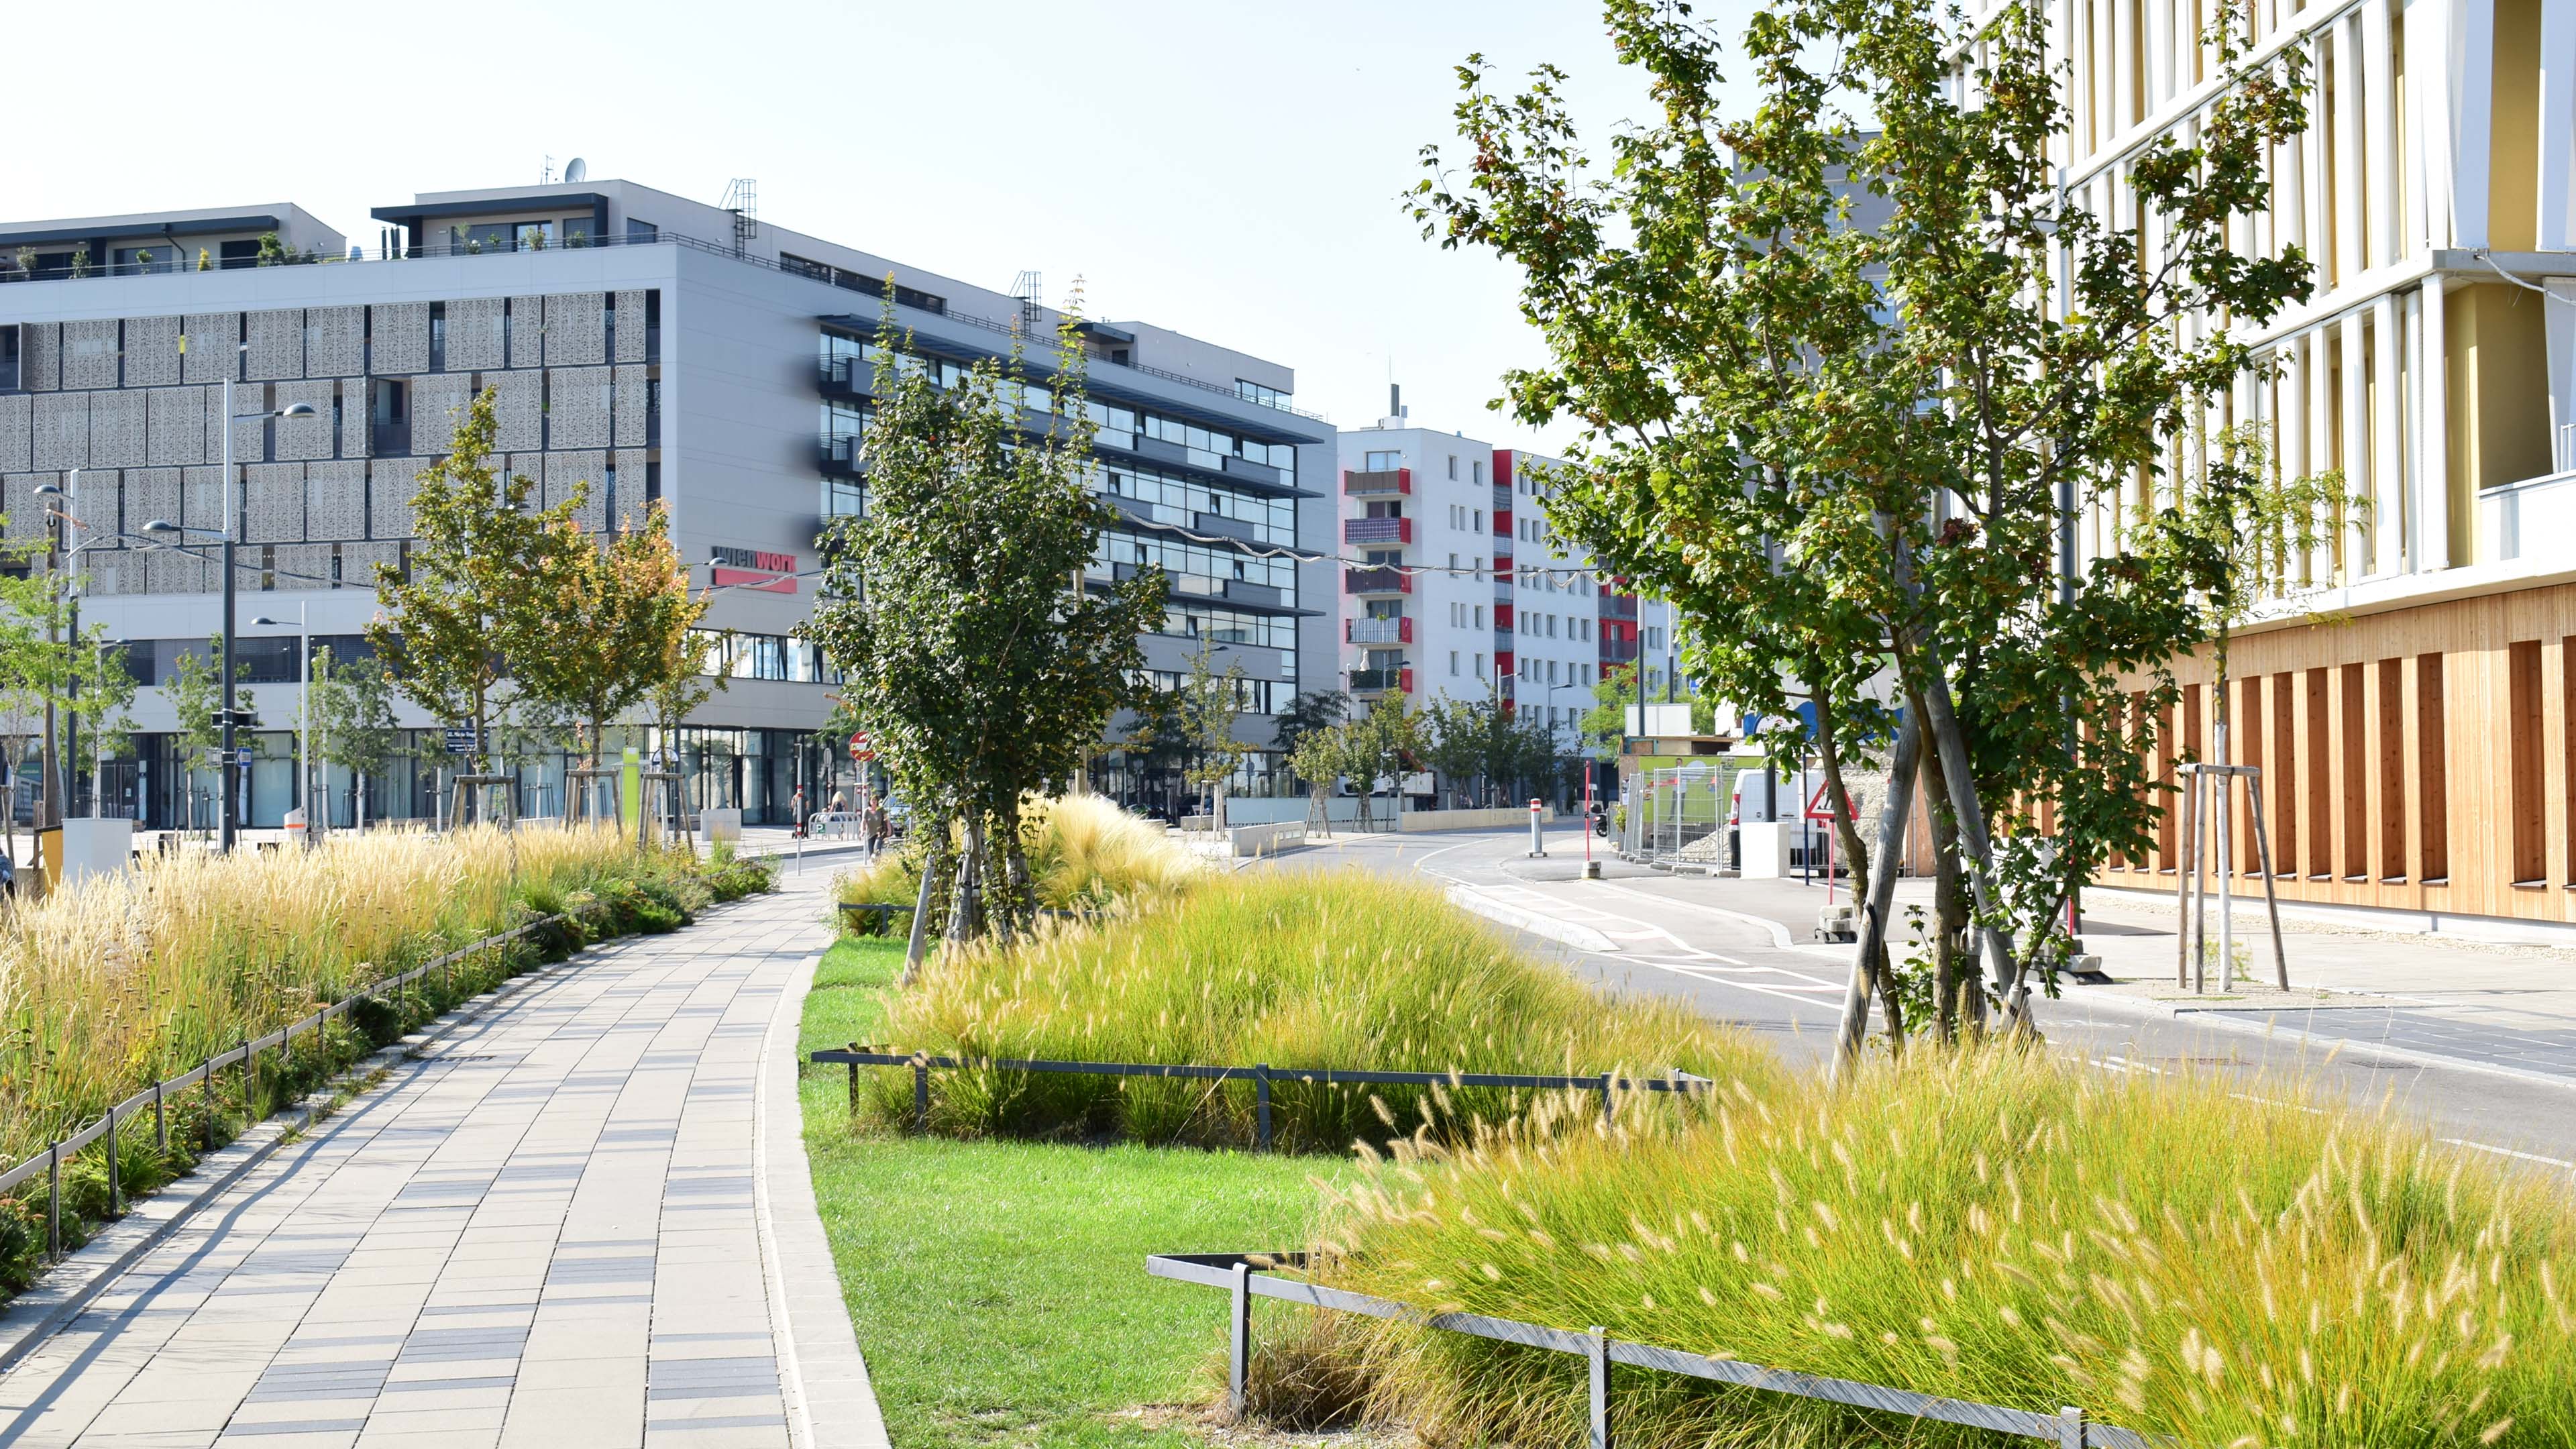 Paved walkway lined with trees and grass through new housing development